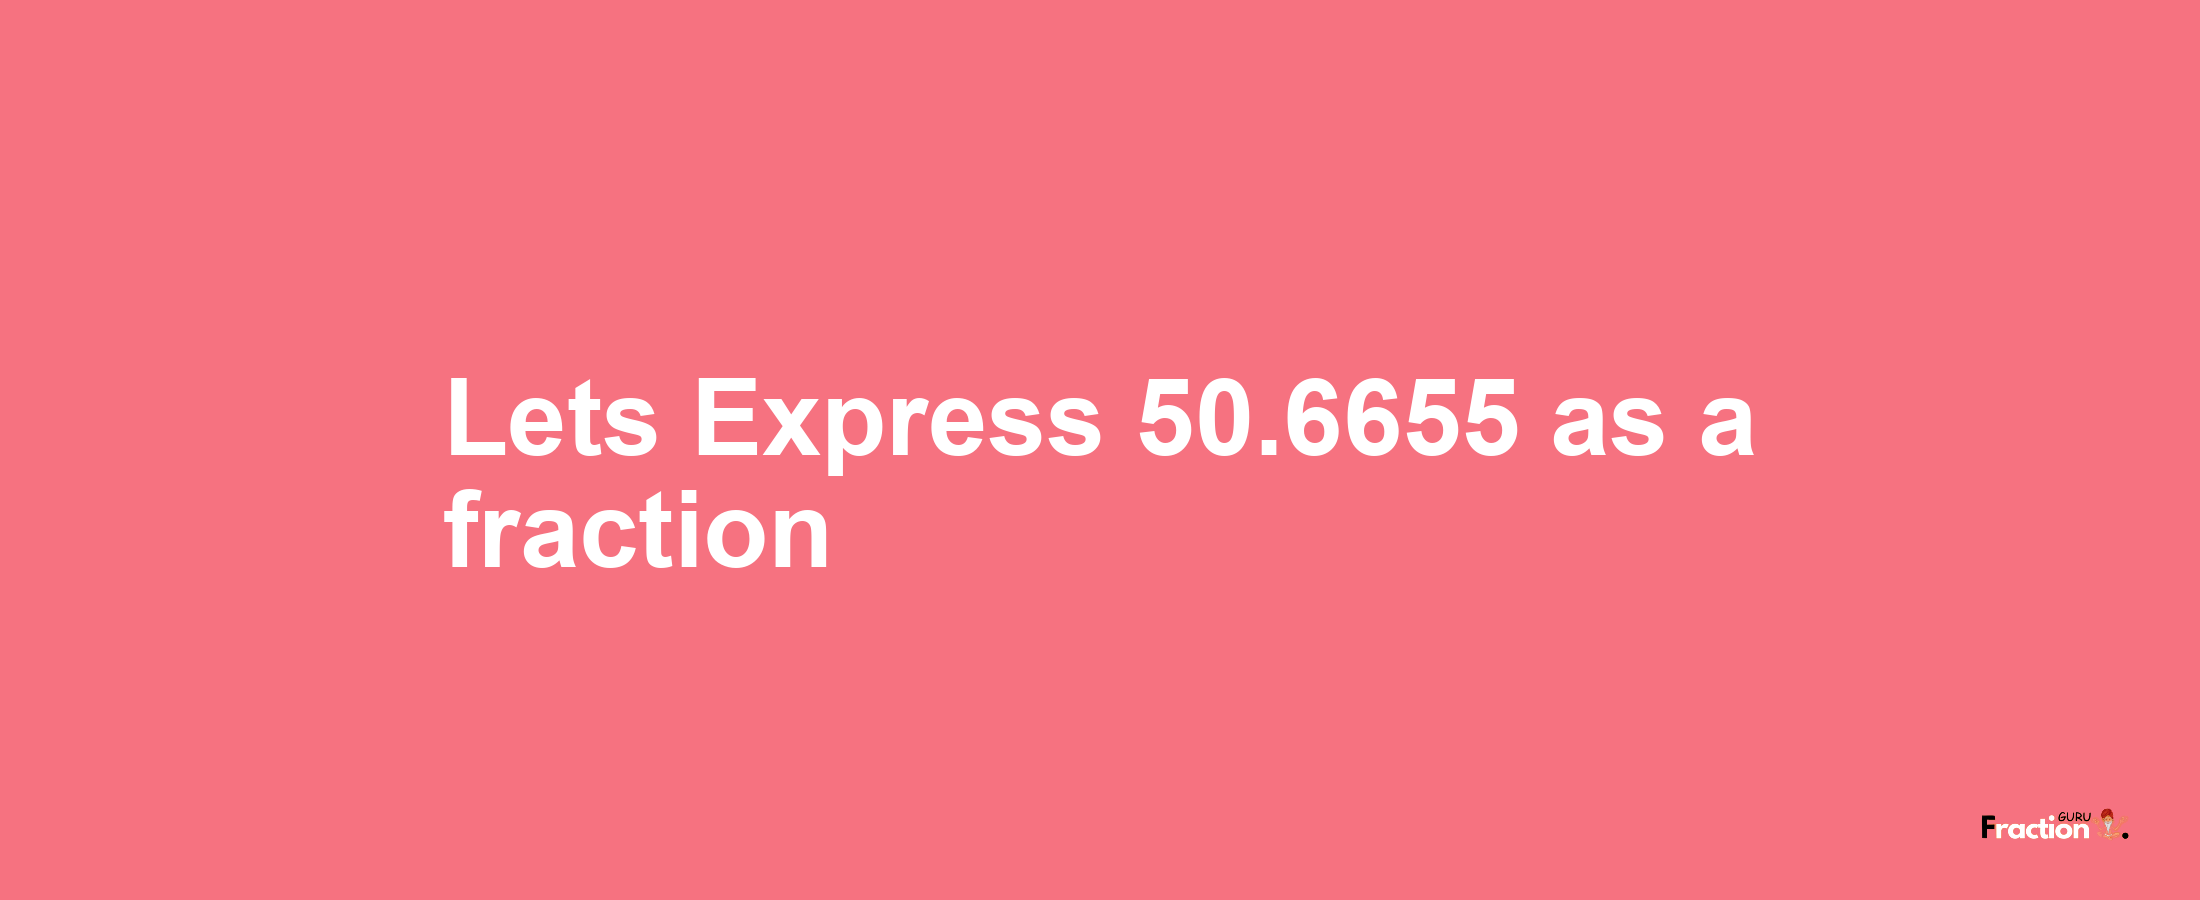 Lets Express 50.6655 as afraction